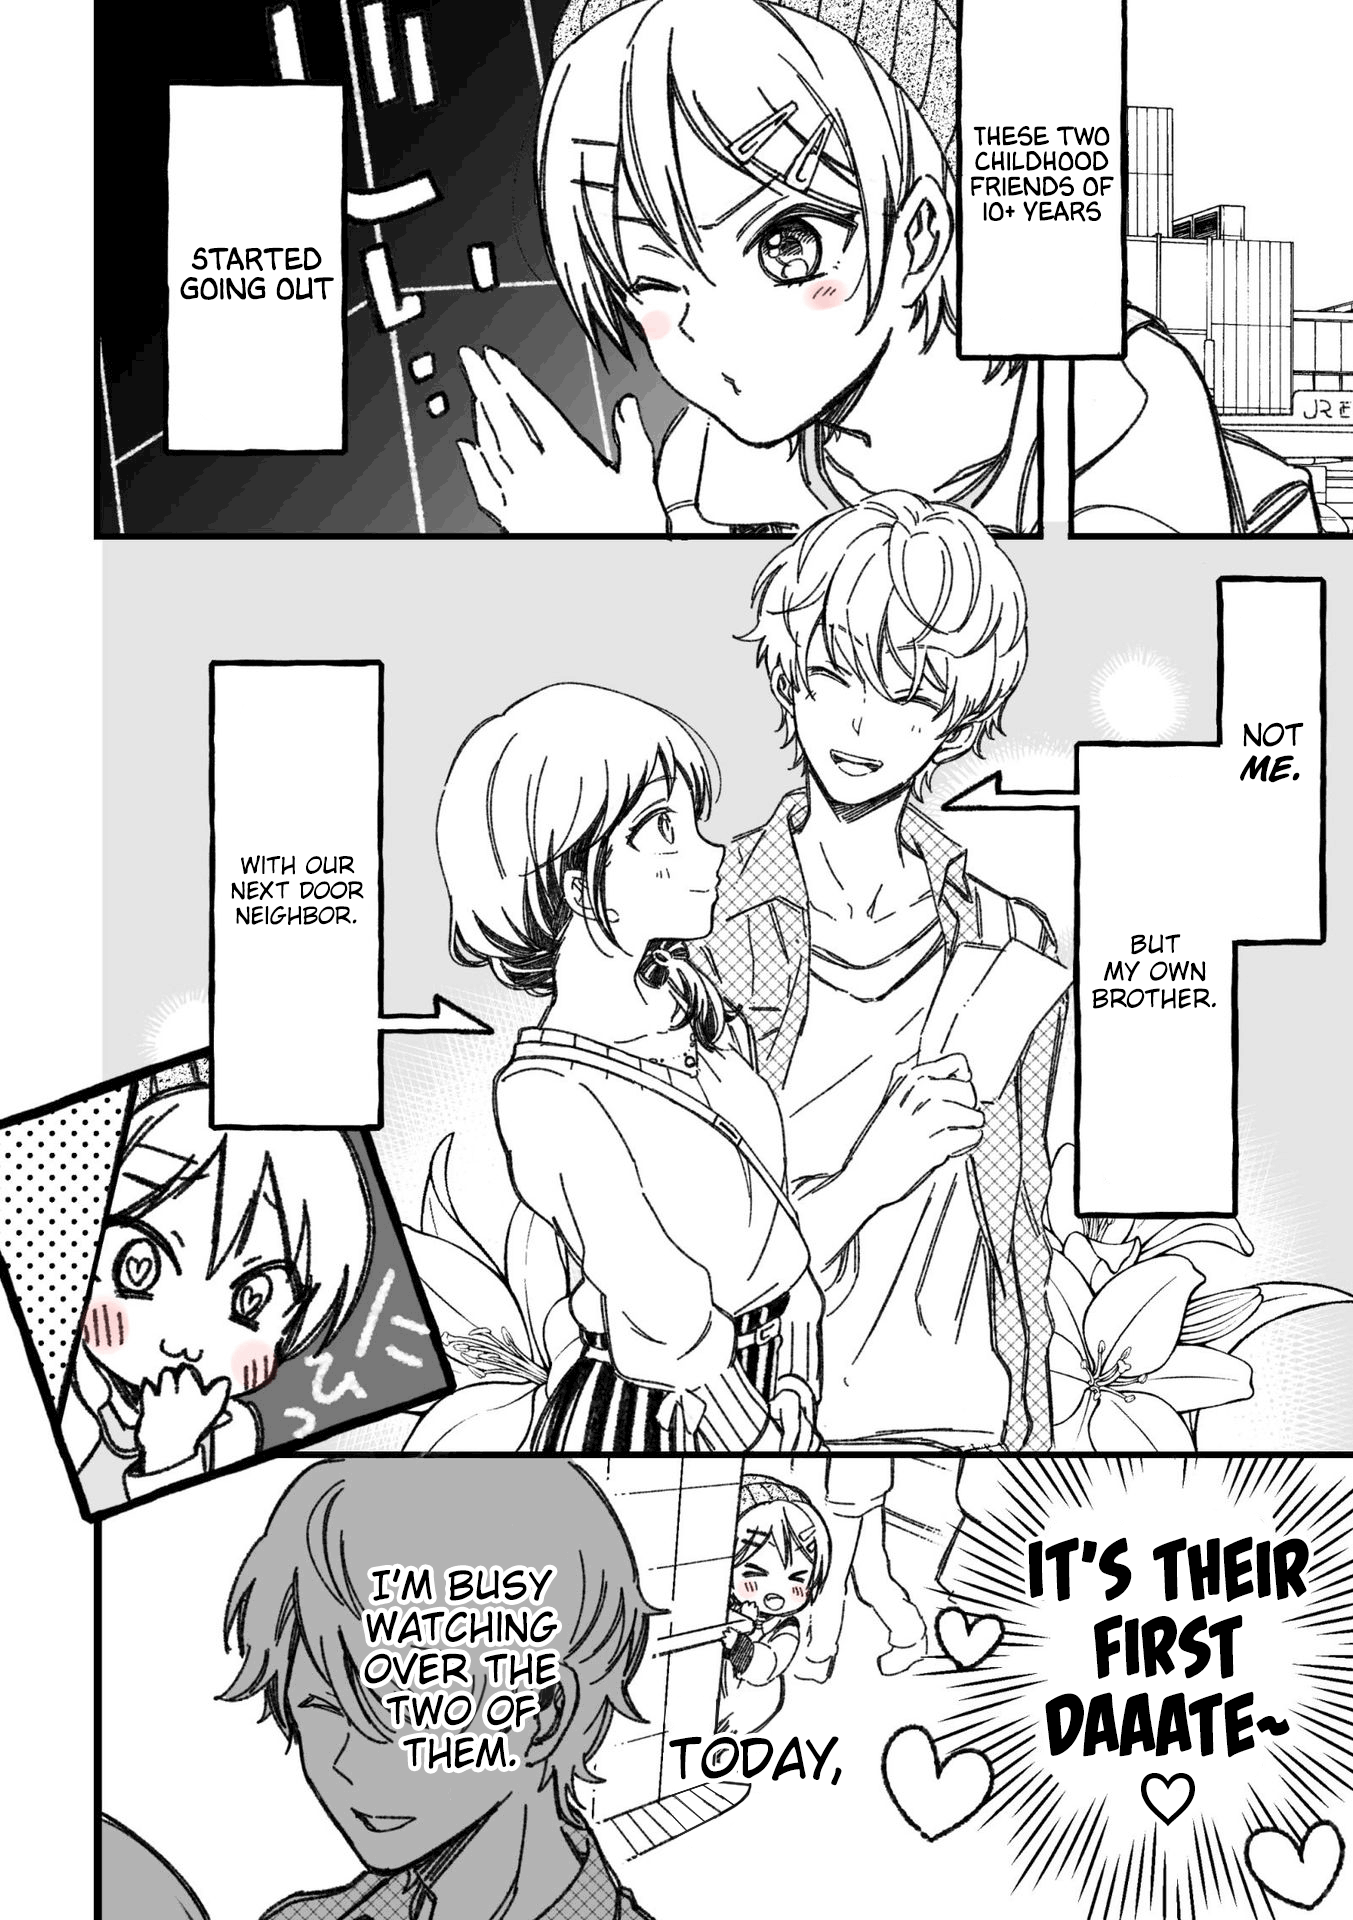 15 Minutes 'til They Actually Start Dating - Page 2